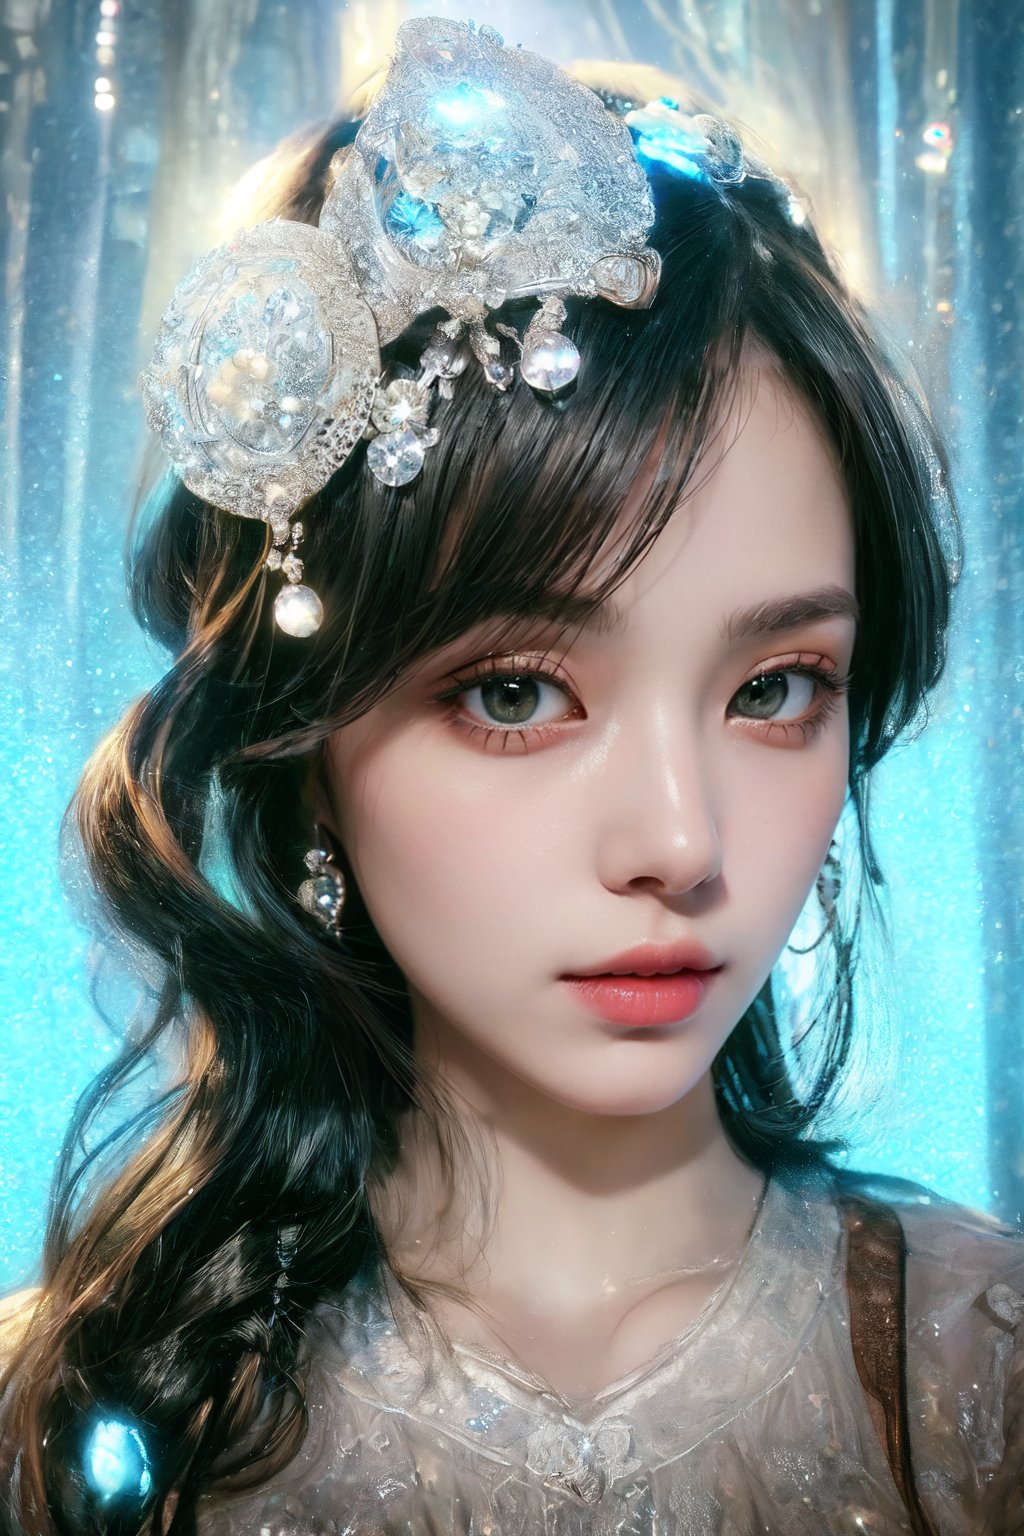 (masterpiece, high quality:1.5), 8K, HDR, 
1girl, well_defined_face, well_defined_eyes, ultra_detailed_eyes, ultra_detailed_face, by FuturEvoLab, 
ethereal lighting, immortal, elegant, porcelain skin, jet-black hair, waves, pale face, ice-blue eyes, blood-red lips, pinhole photograph, retro aesthetic, monochromatic backdrop, mysterious, enigmatic, timeless allure, siren of the night, secrets, longing, hidden dangers, captivating, nostalgia, timeless fascination, Edge feathering and holy light, 